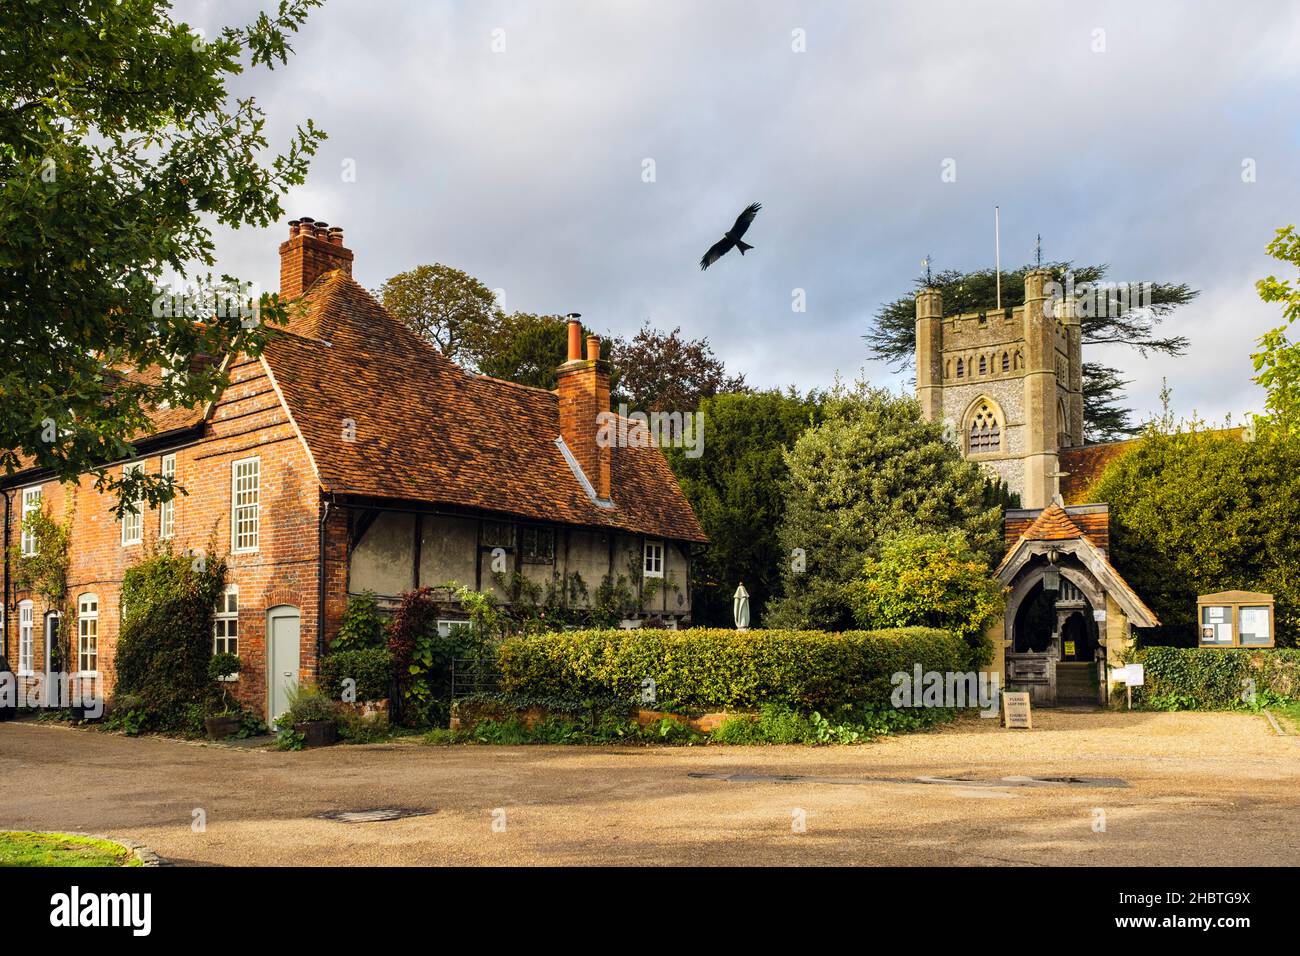 Period cottages by 14c St Mary the Virgin church in historic Chilterns village with Red Kite flying low overhead. Hambleden Buckinghamshire England UK Stock Photo